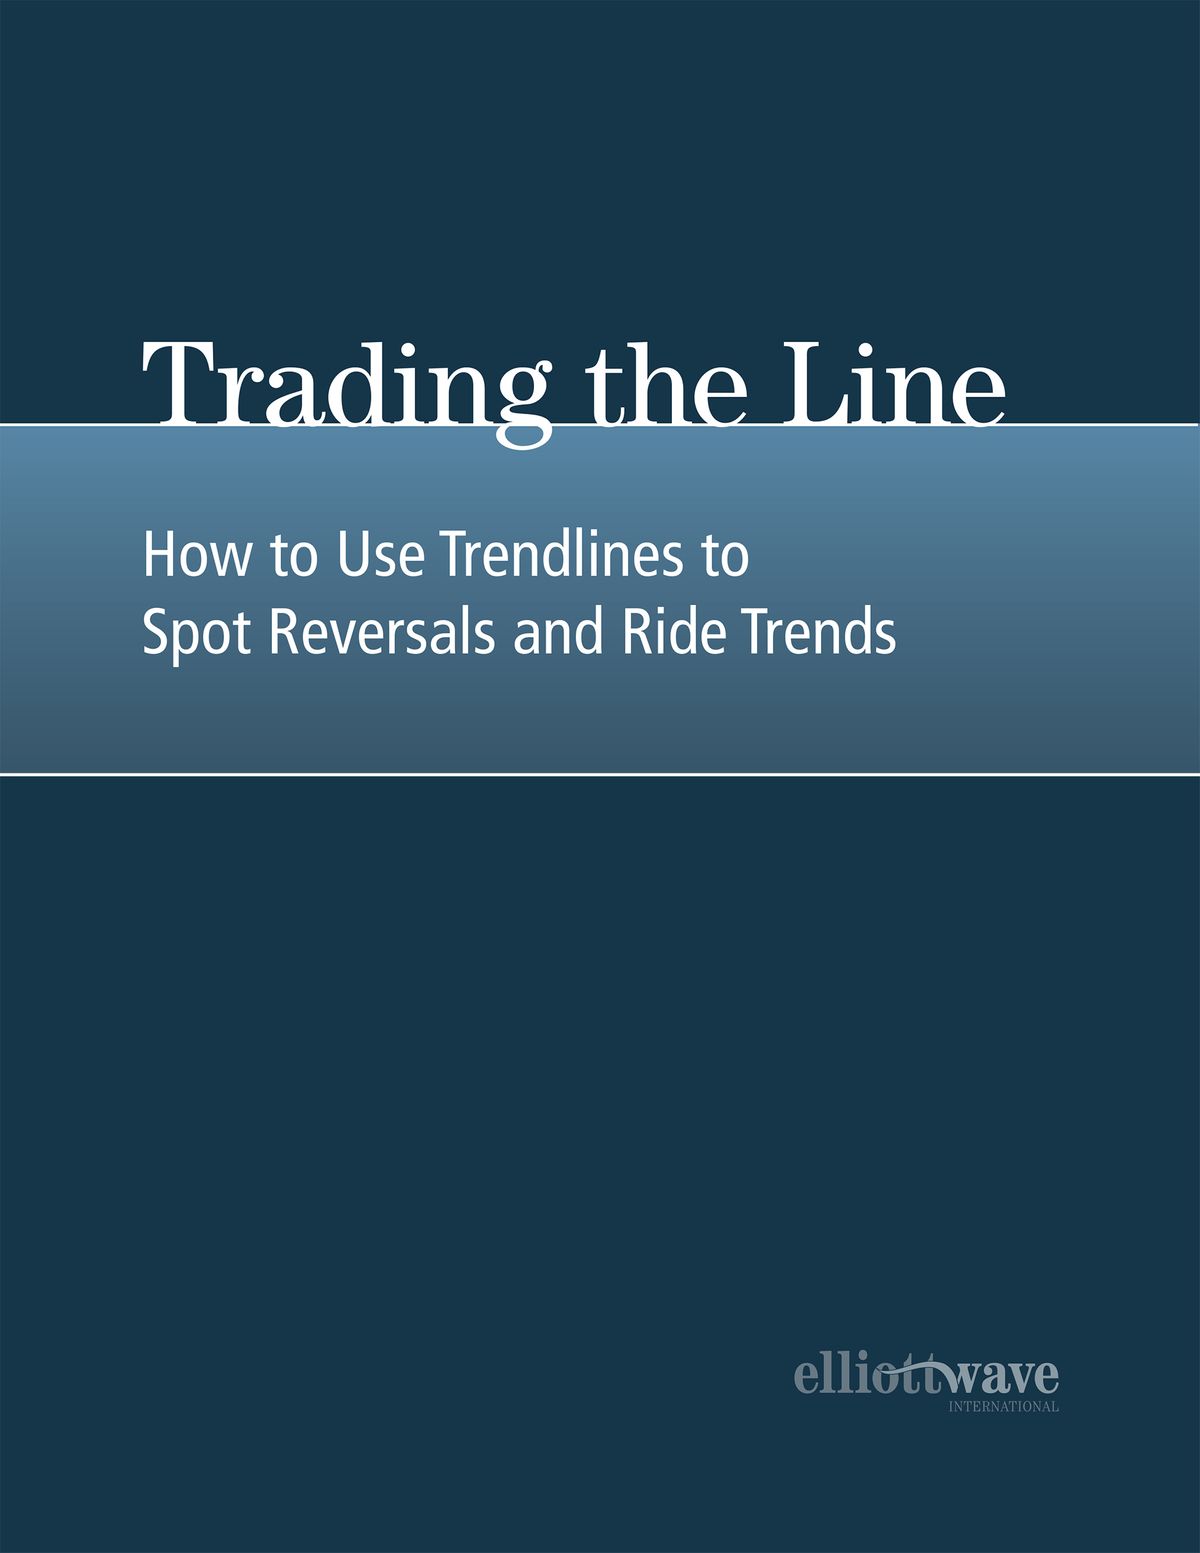 Jeffrey Kennedy - Trading the Line. How to Use Trendlines to Spot Reversals and Ride Trends